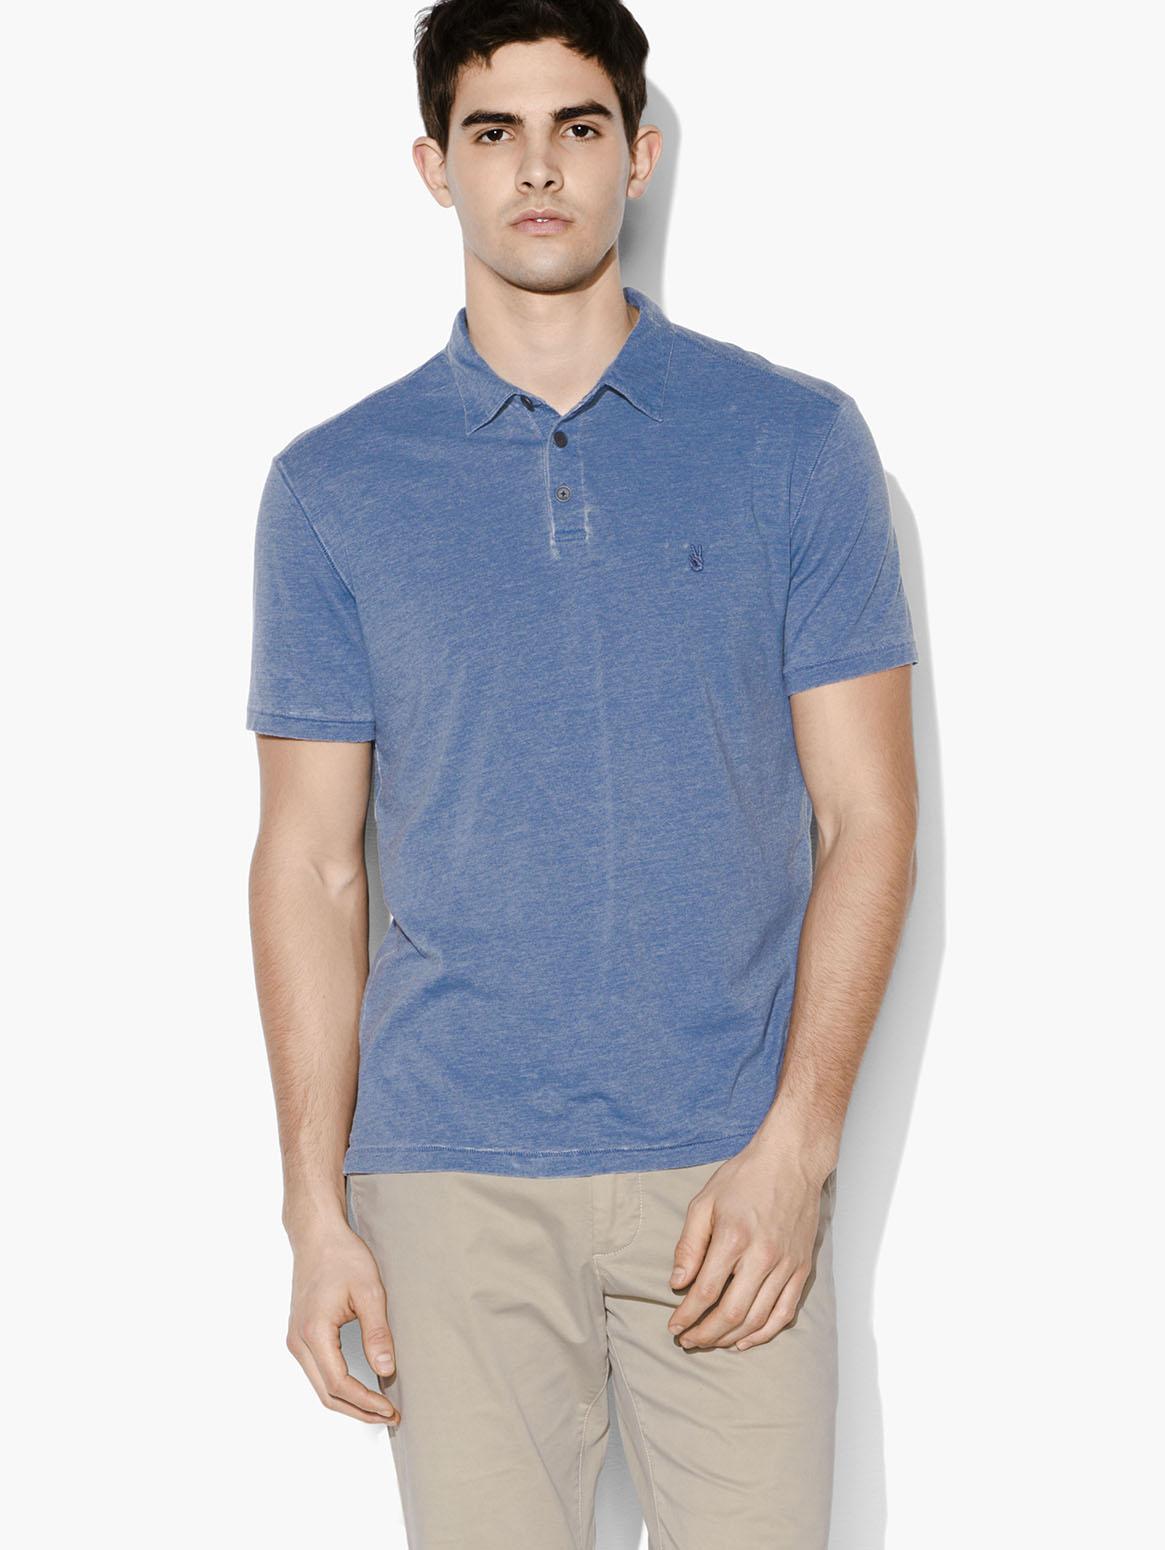 ANTON BURNOUT PEACE POLO image number 1